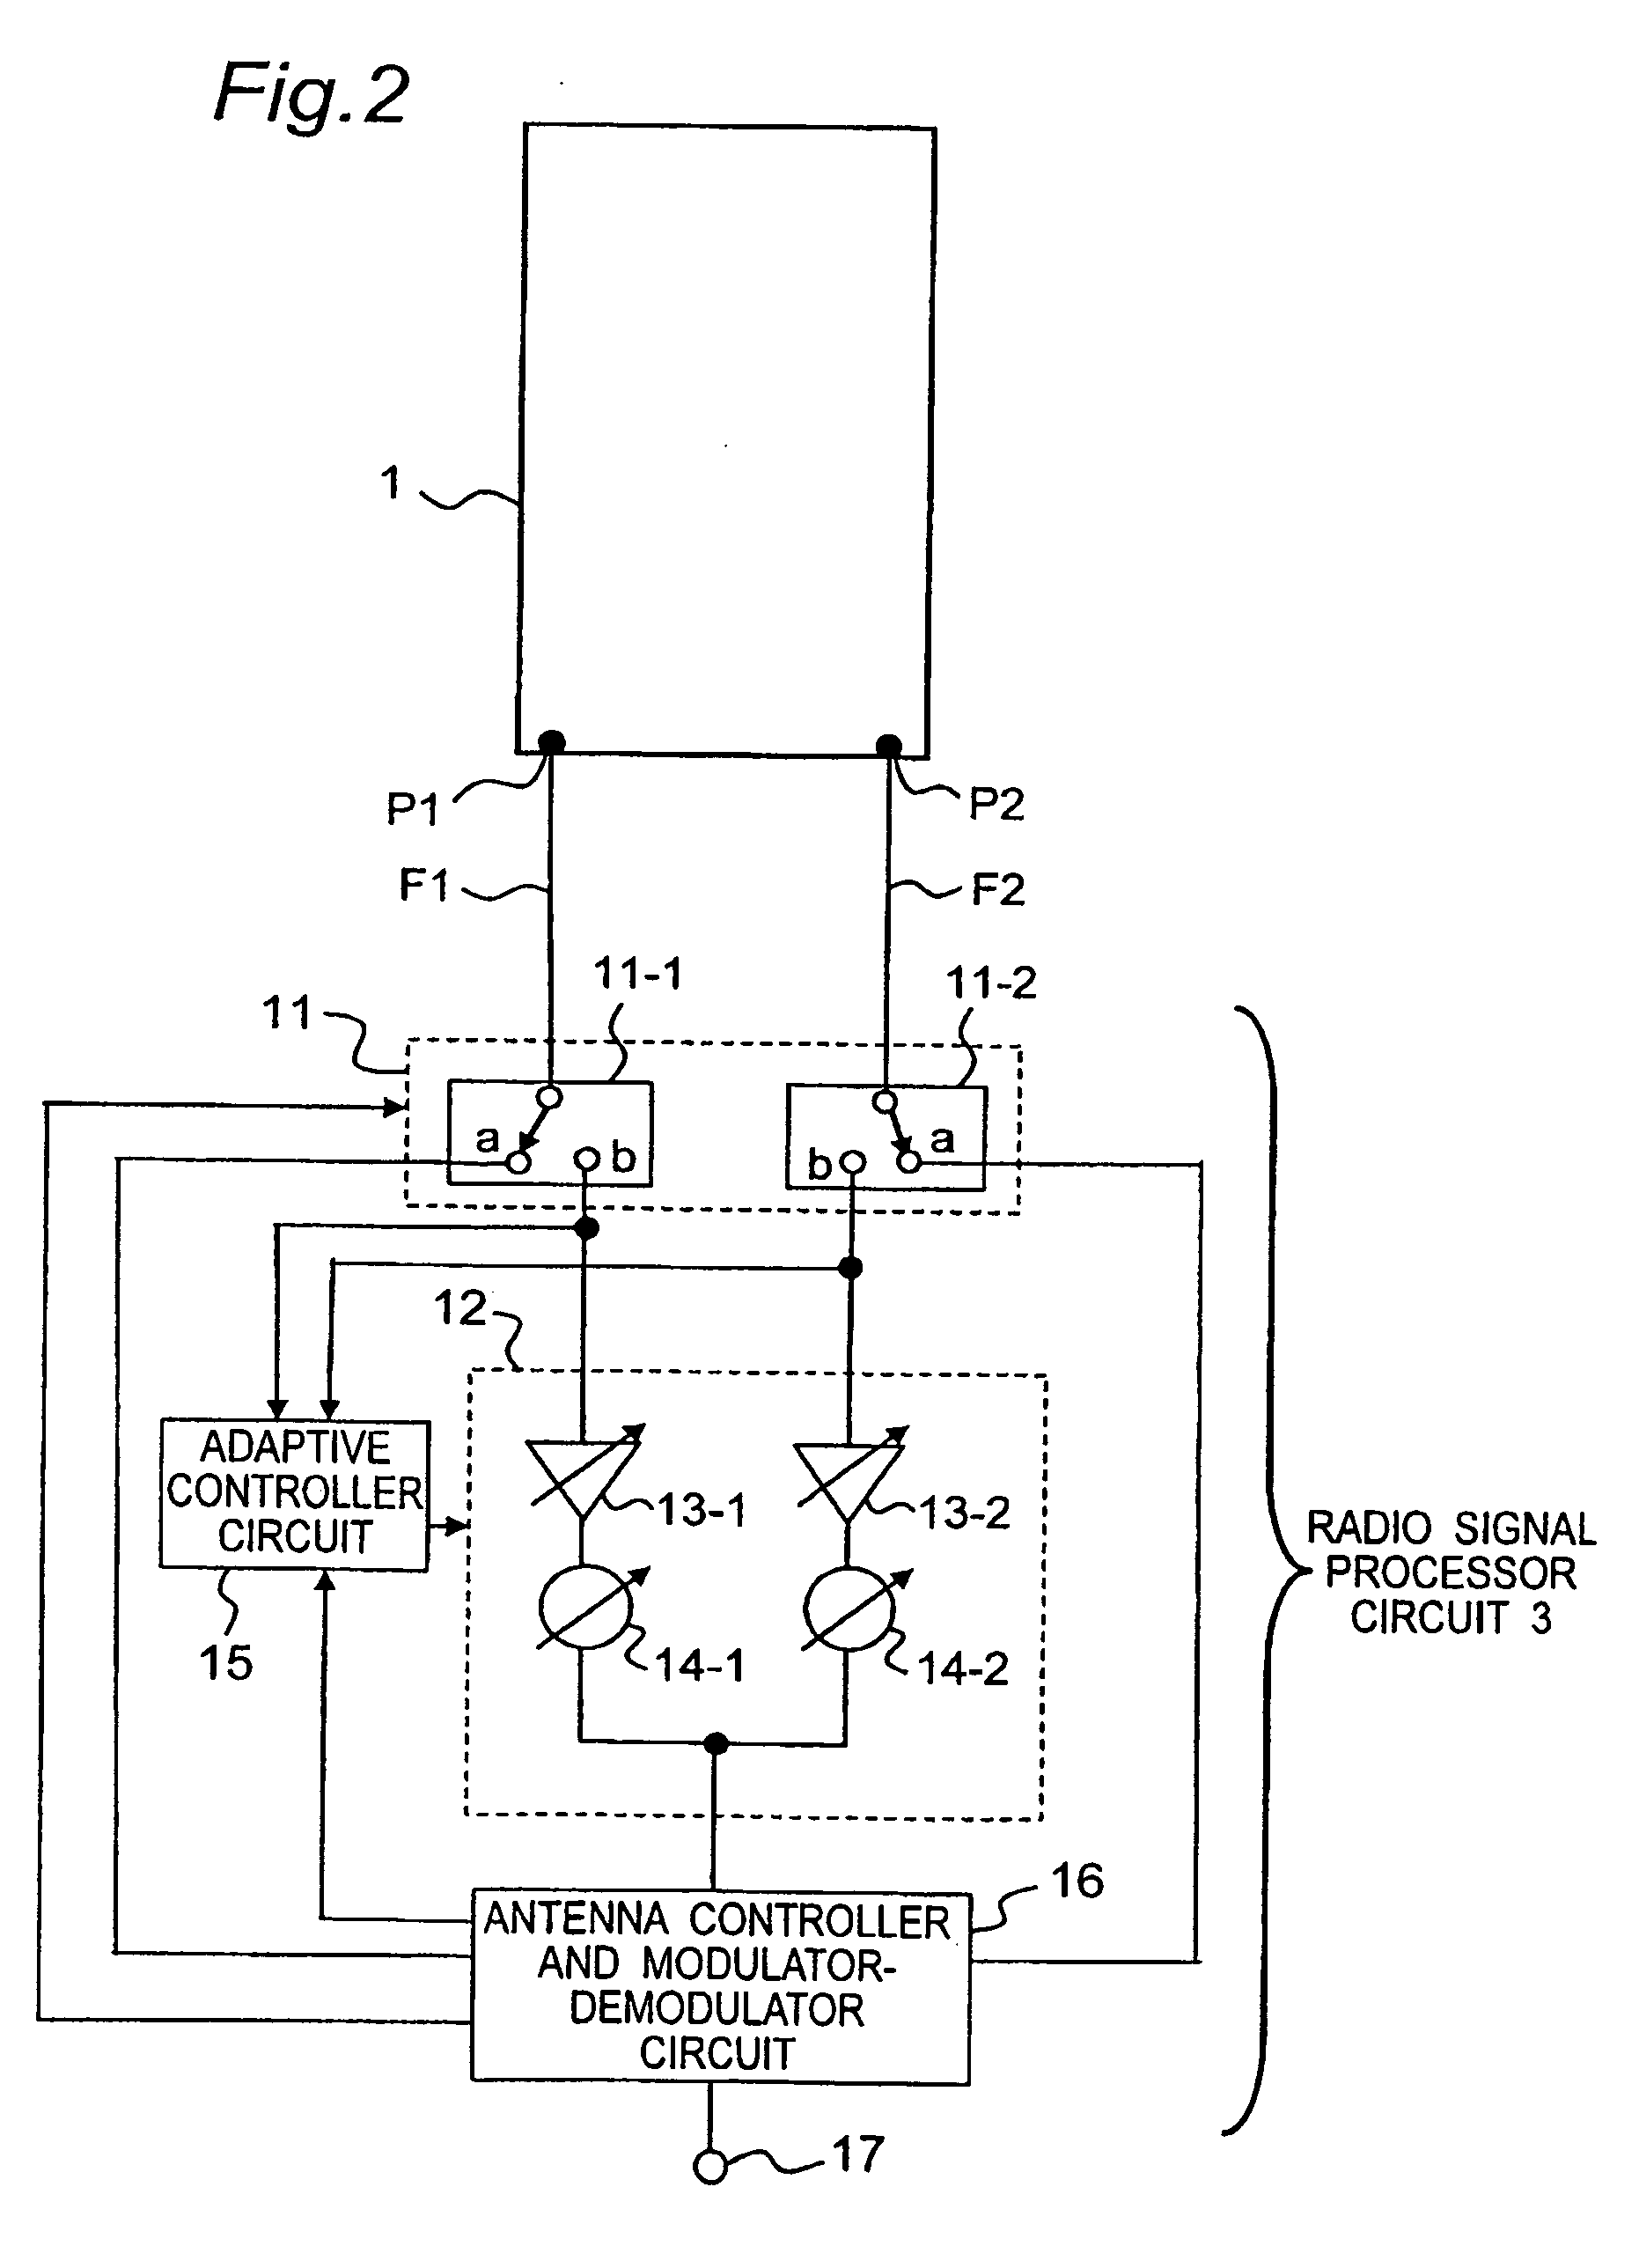 Antenna apparatus provided with electromagnetic coupling adjuster and antenna element excited through multiple feeding points